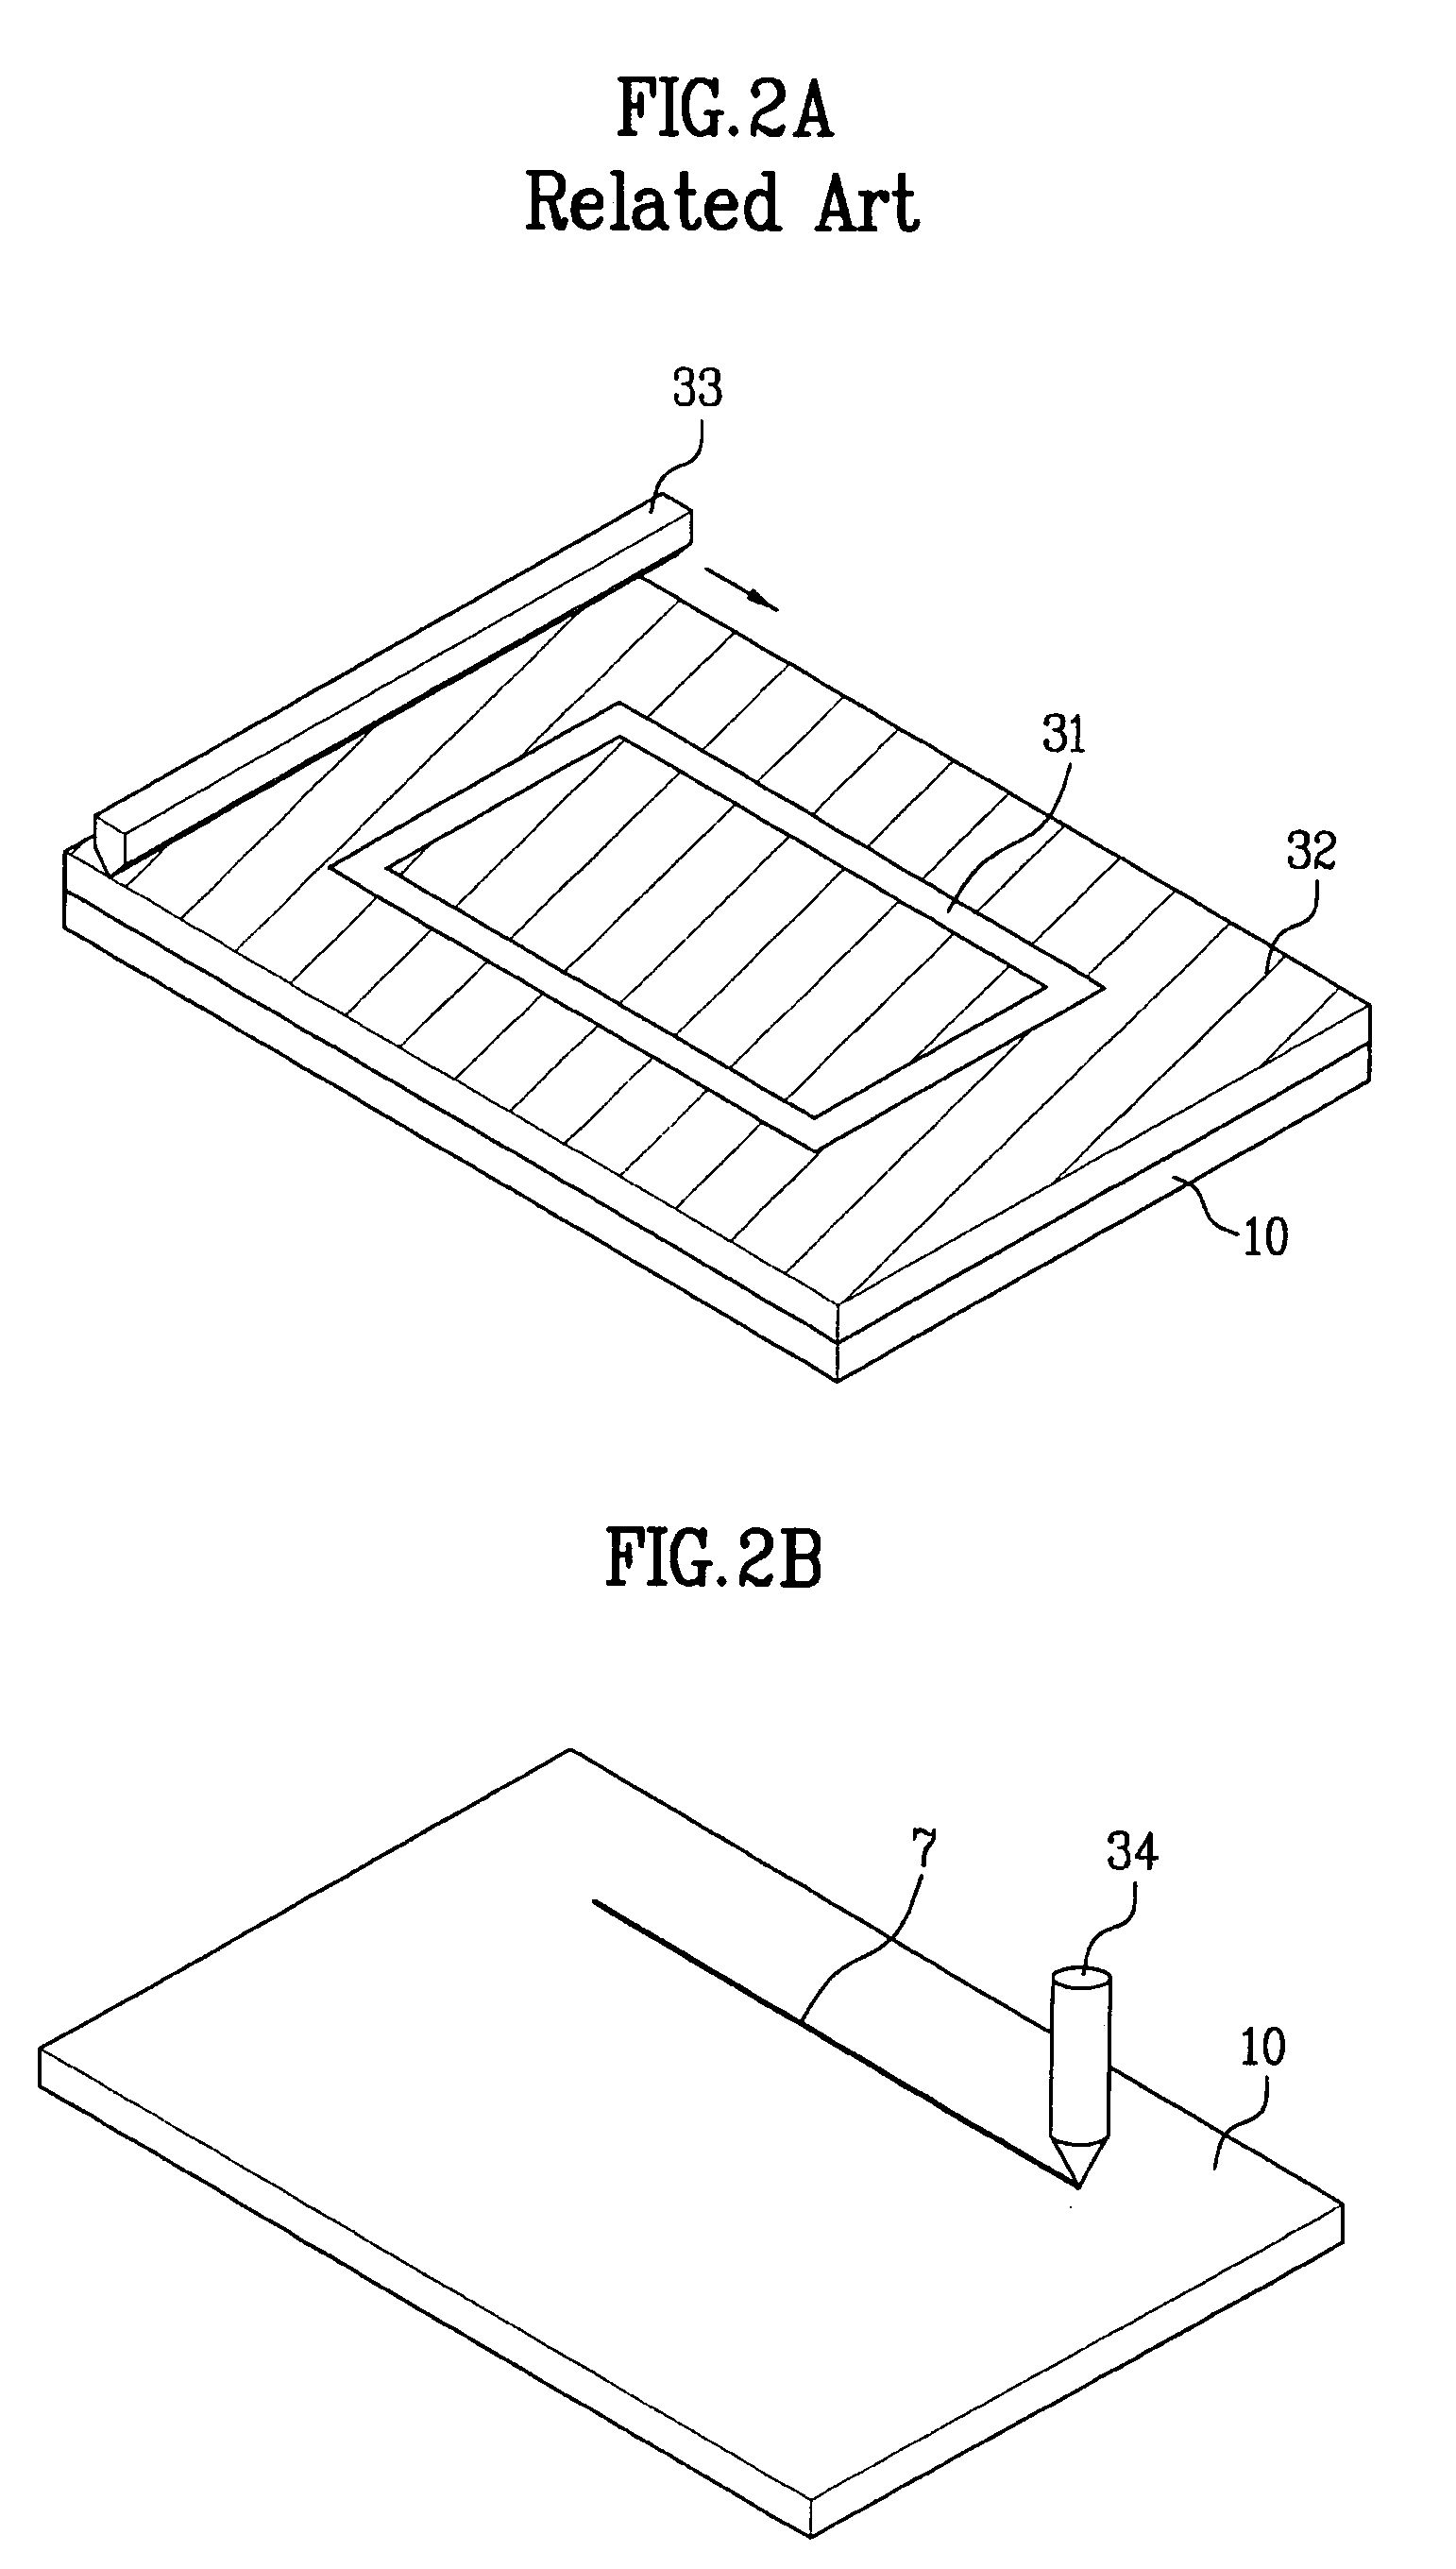 LCD manufacturing method involving forming a main seal pattern by screen printing and a dummy seal pattern by selective dispensing